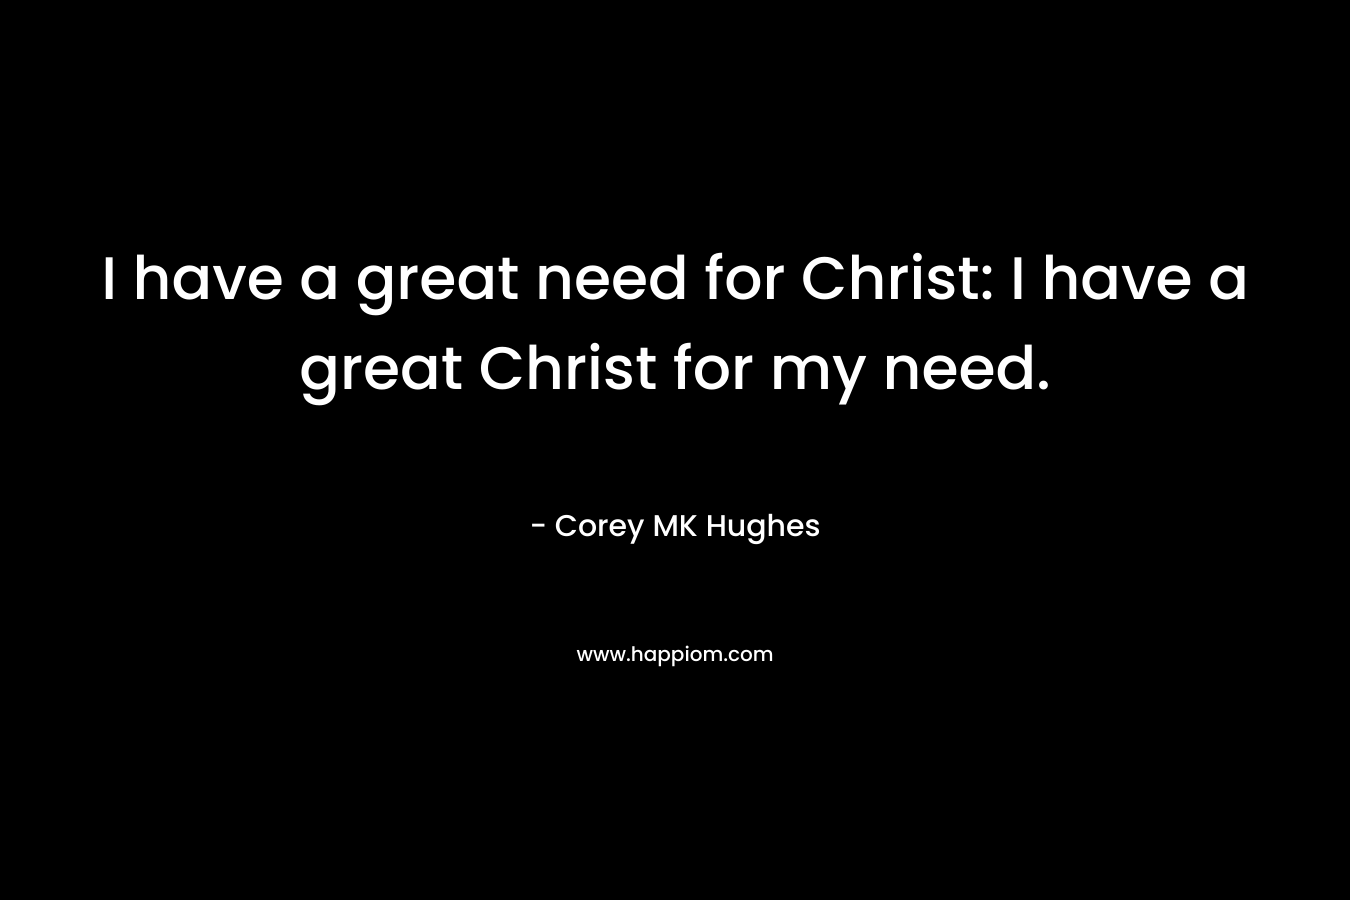 I have a great need for Christ: I have a great Christ for my need.